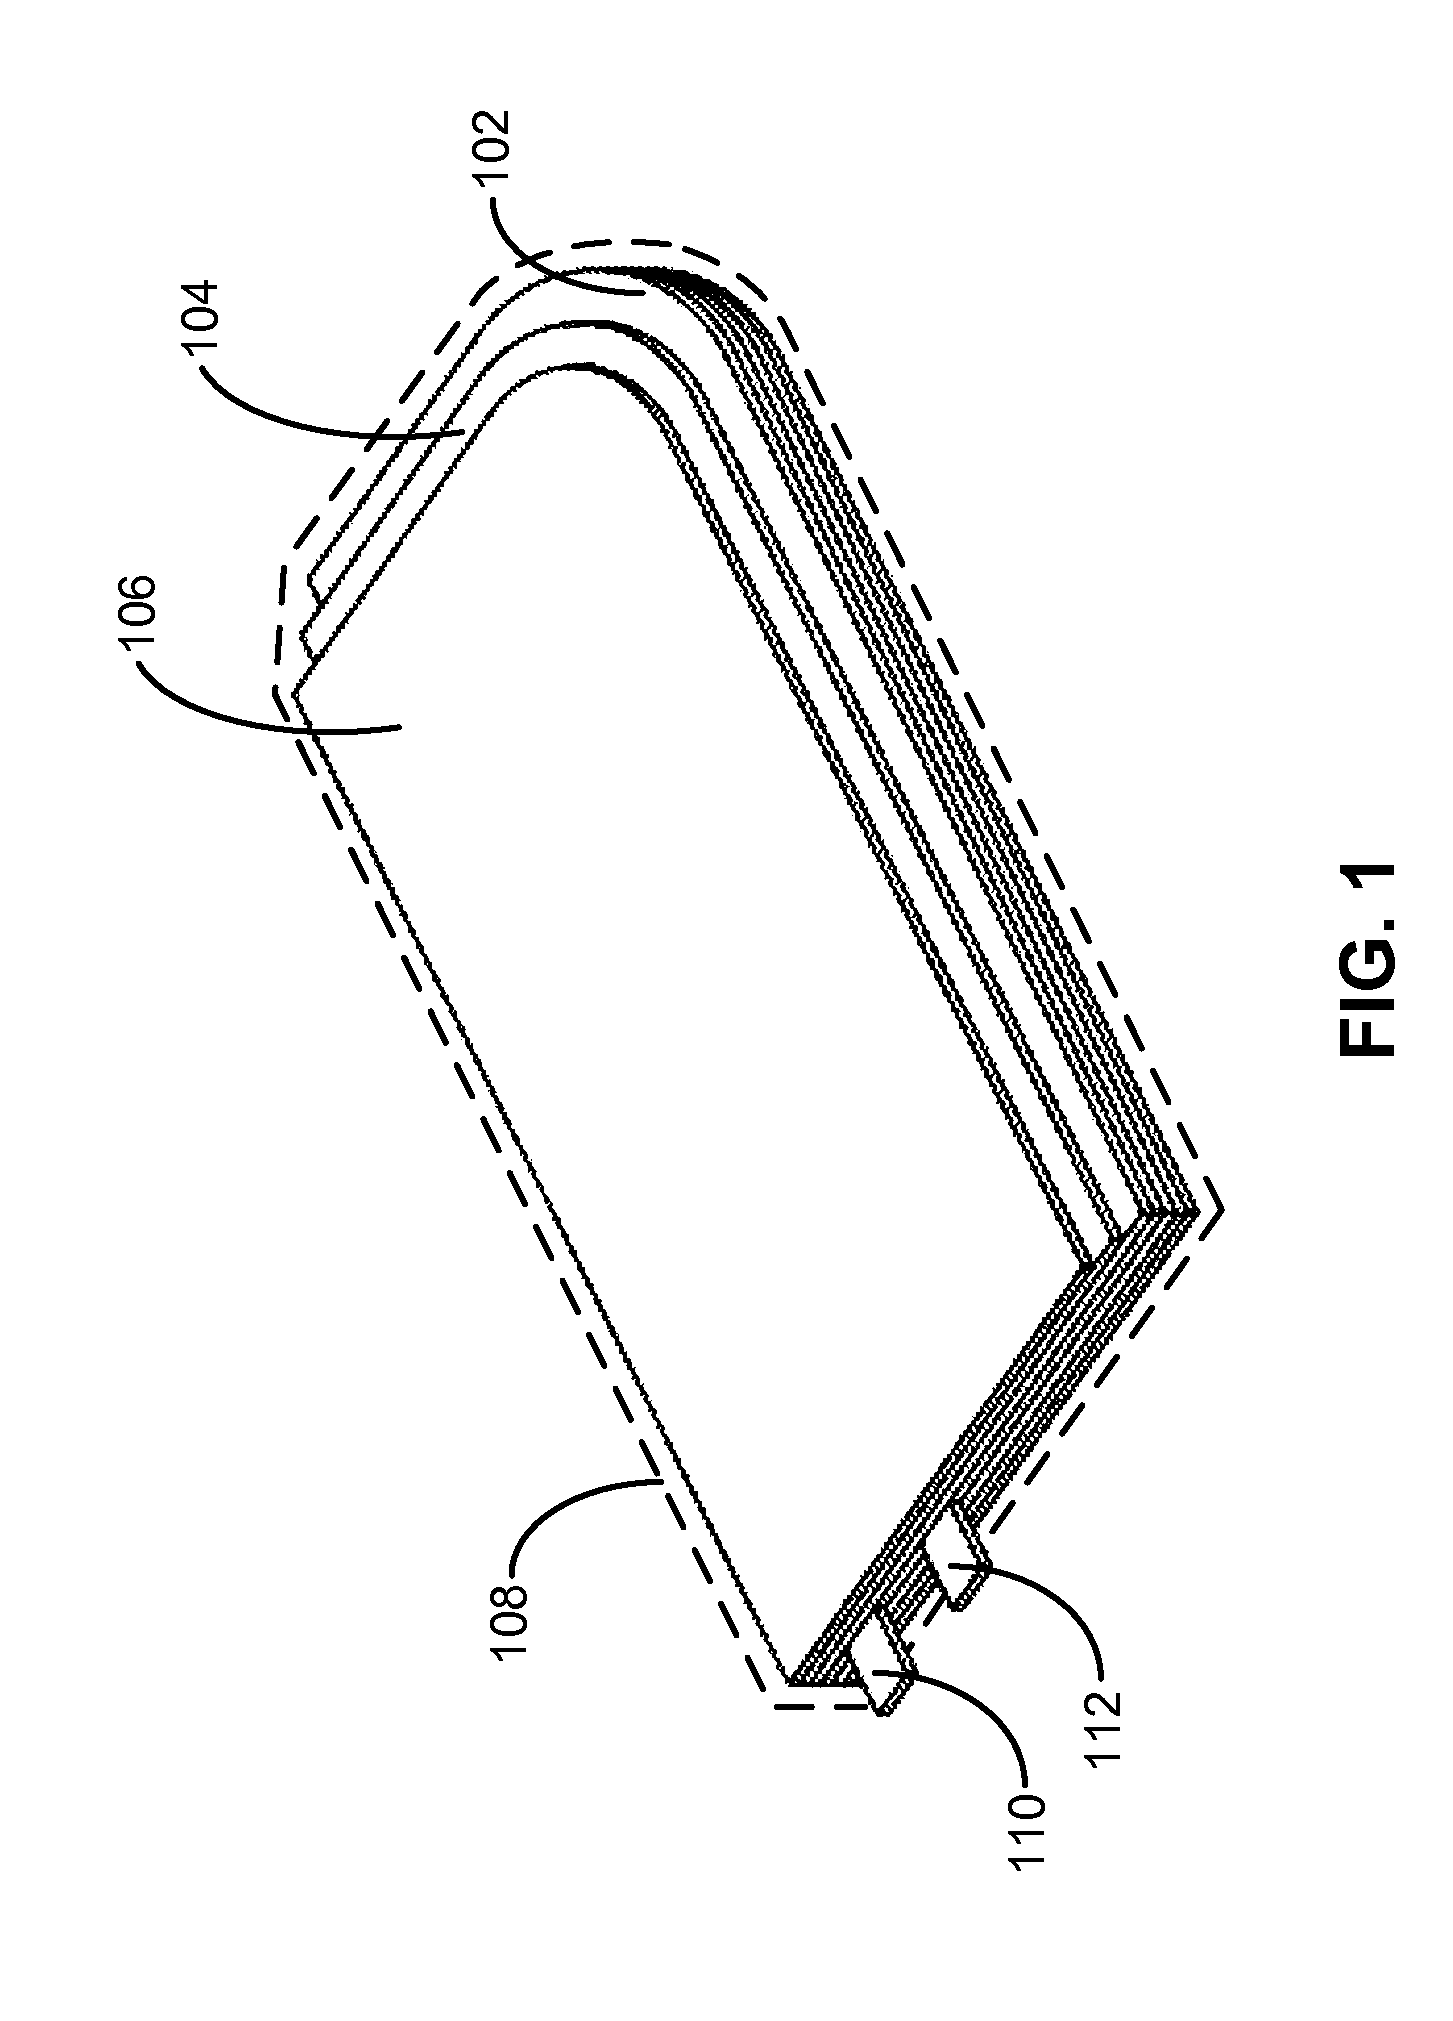 Non-rectangular batteries for portable electronic devices